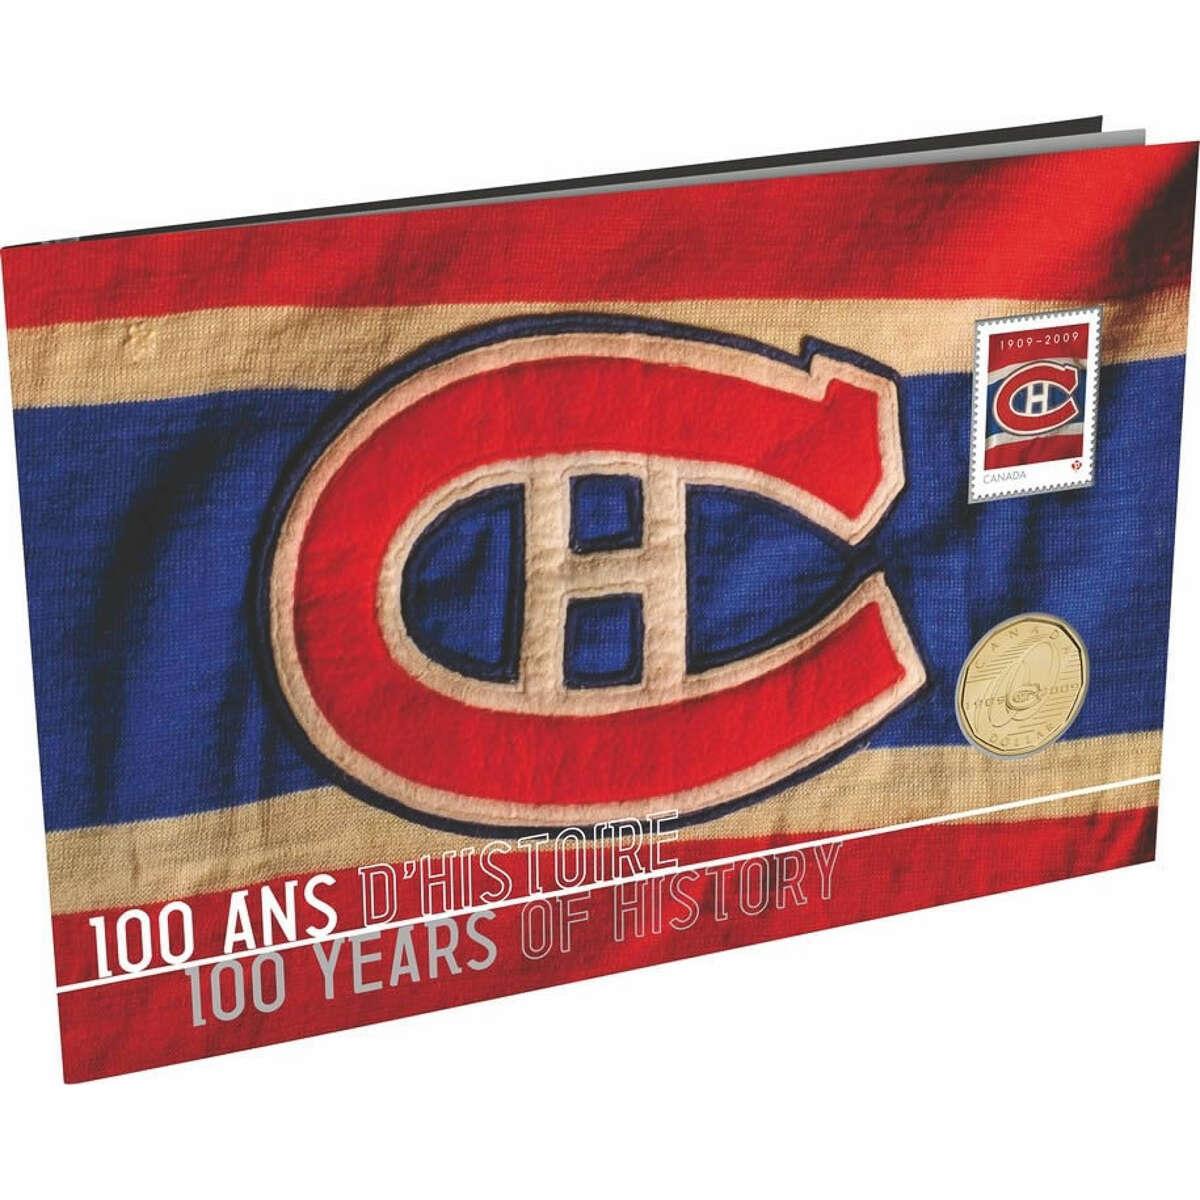 1909-2009 : Montreal Canadiens - Canada Postage Stamp